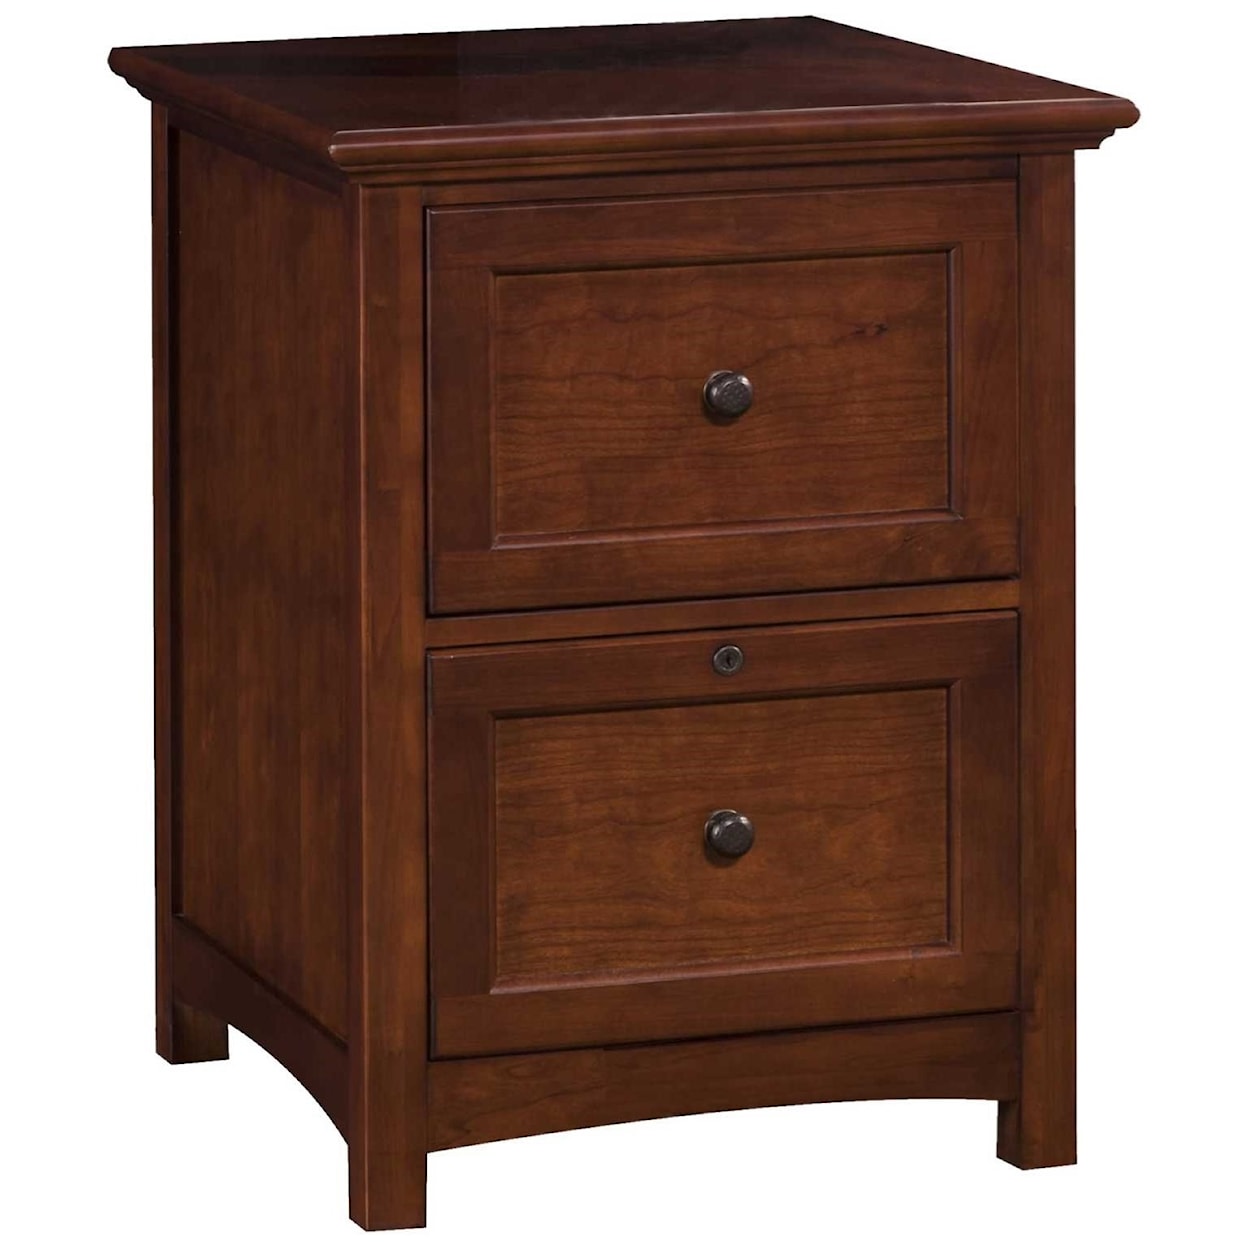 Winners Only Flagstaff 2-Drawer File Cabinet